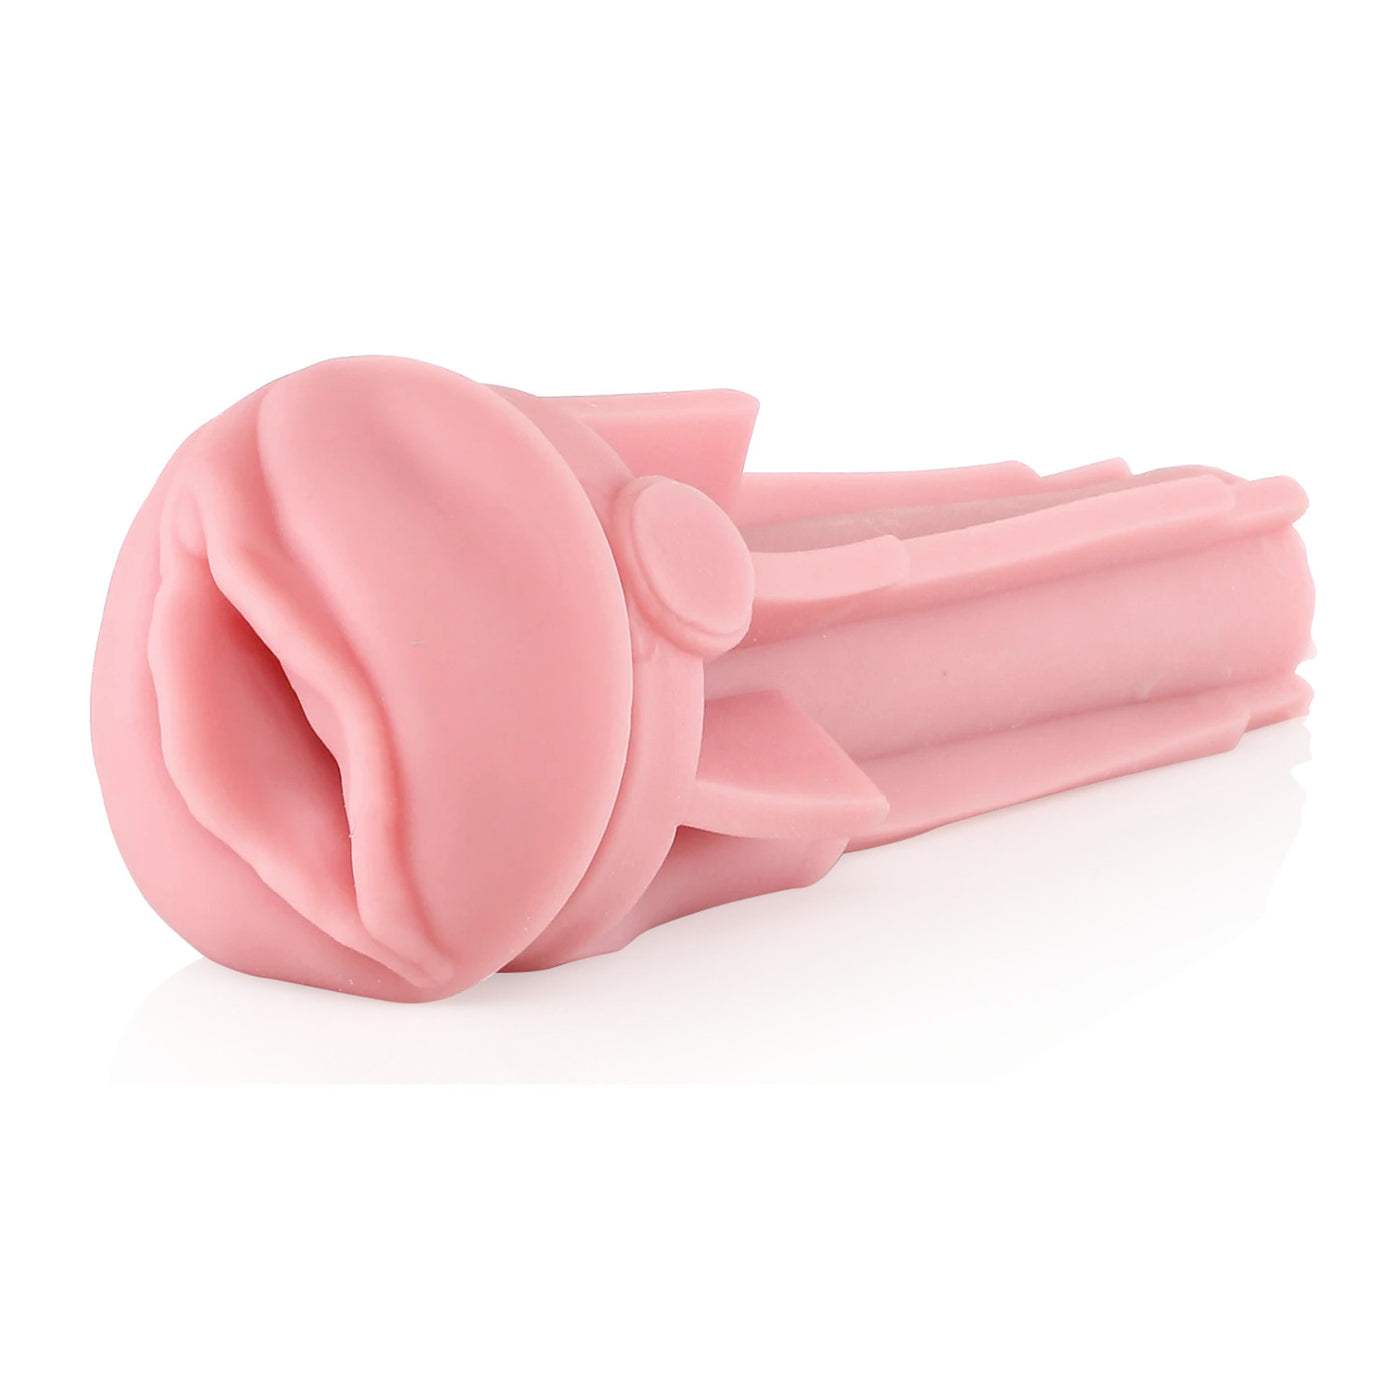 Fleshlight Heavenly Pink Lady or Pink Butt – Love is Love